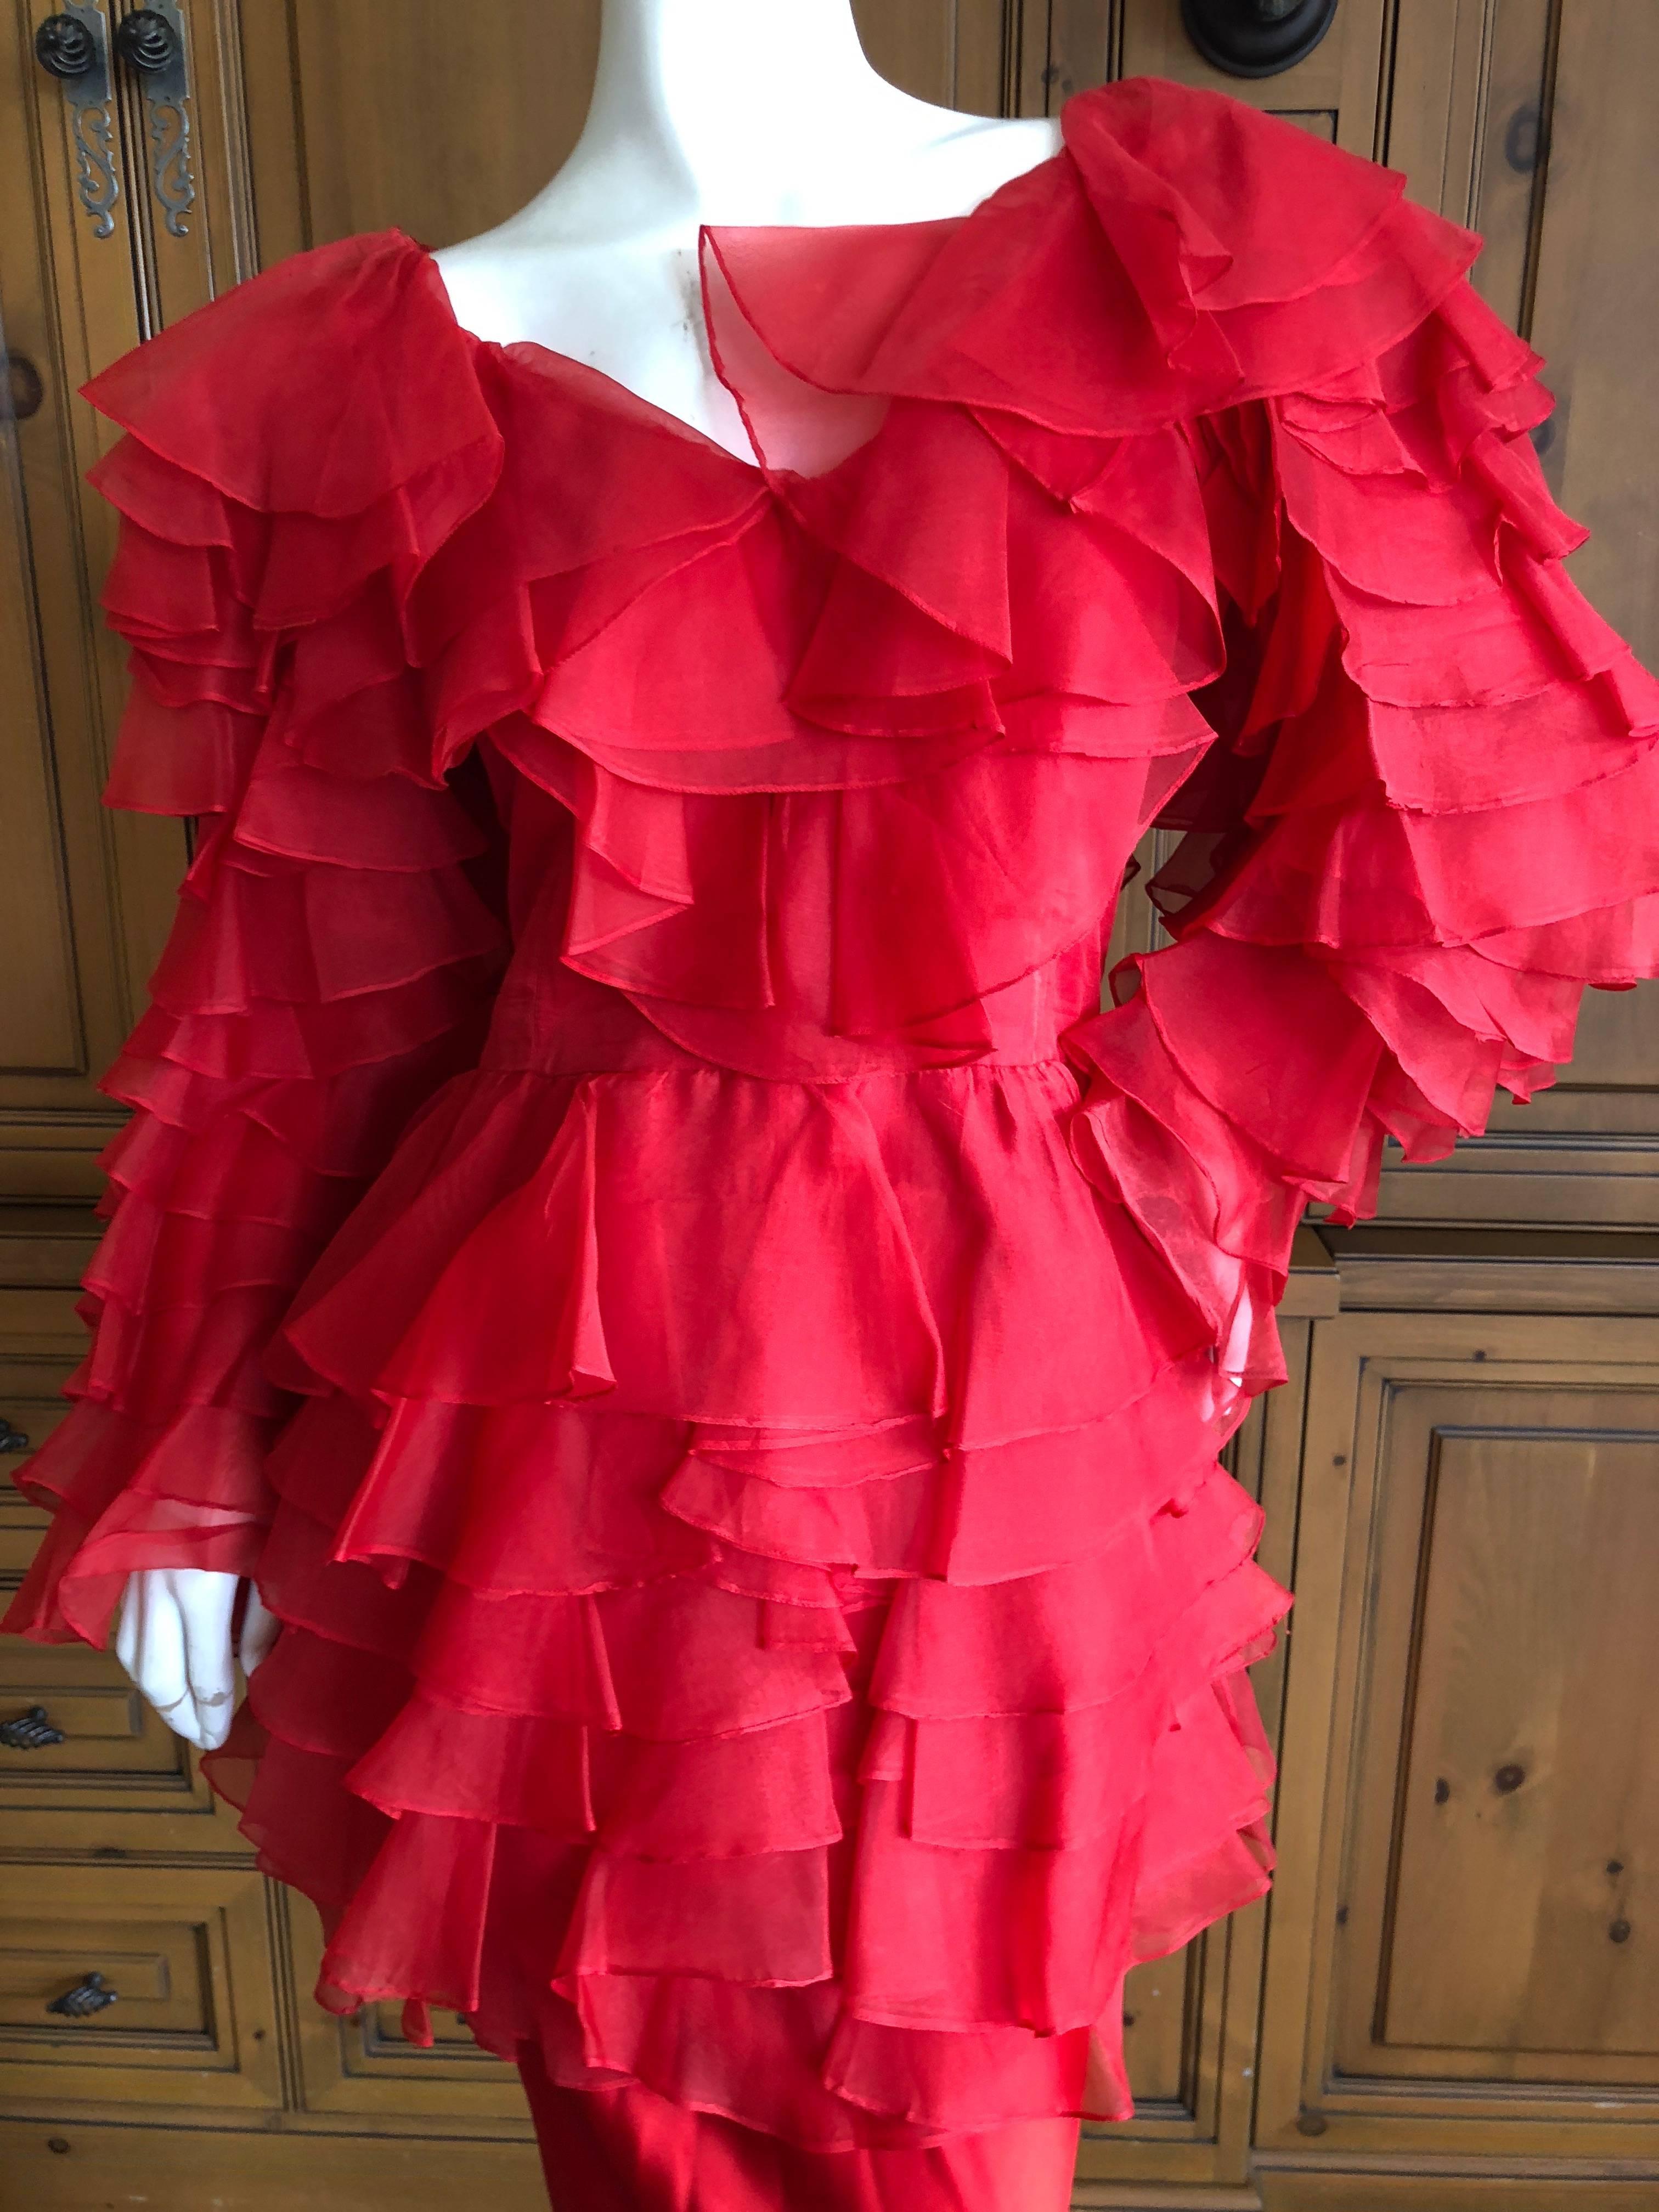 Cardinali 1970s Scarlet Red Ruffled Top and Bias Cut Silk Skirt with Fascinator For Sale 2